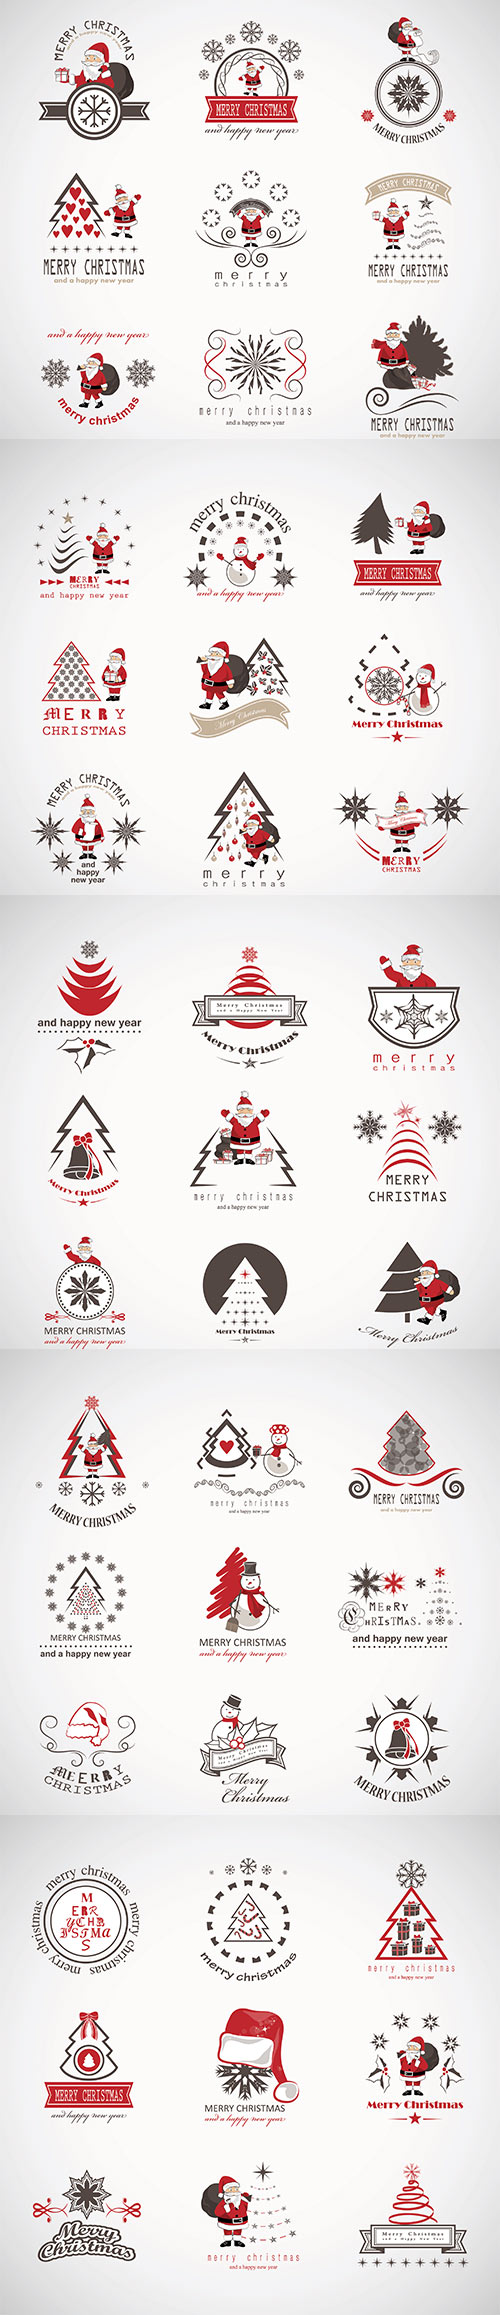 Christmas icons and elements set